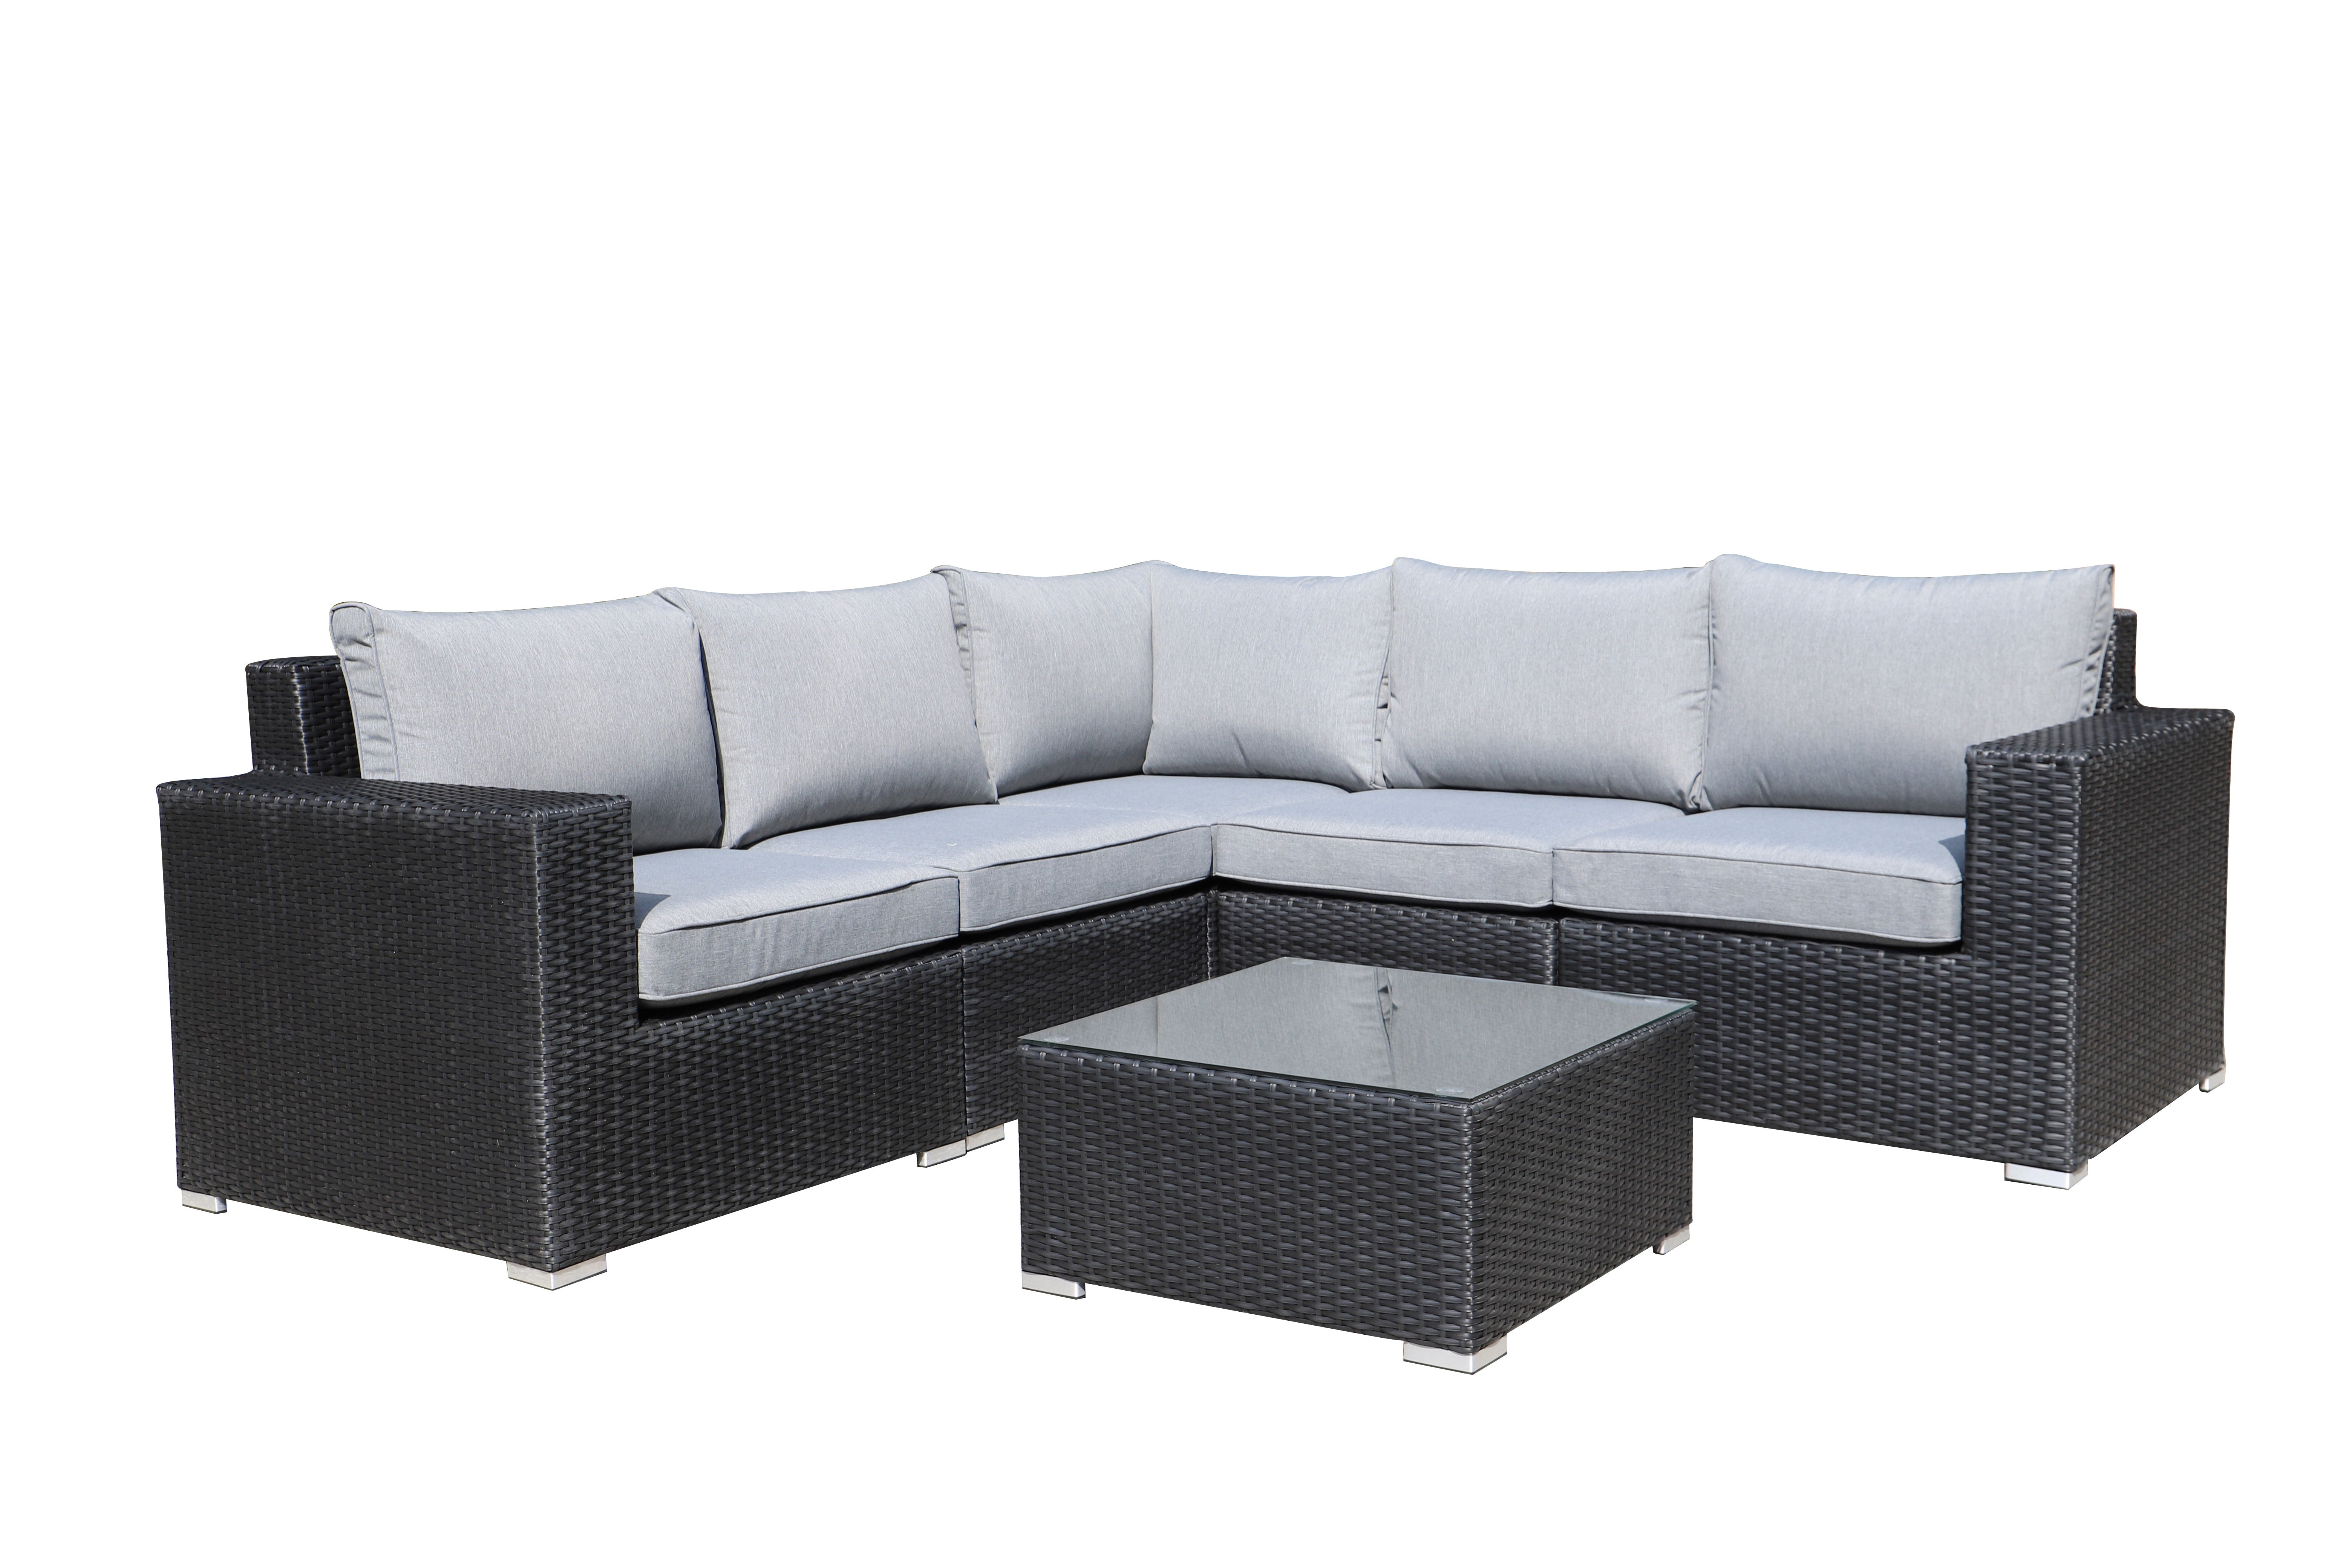 MOSS MOSS-0908NC - Carolina Collection, 6 pcs modular black flat wicker and aluminum structure including ottoman, with grey cushion and glass for coffee table (3 boxes)